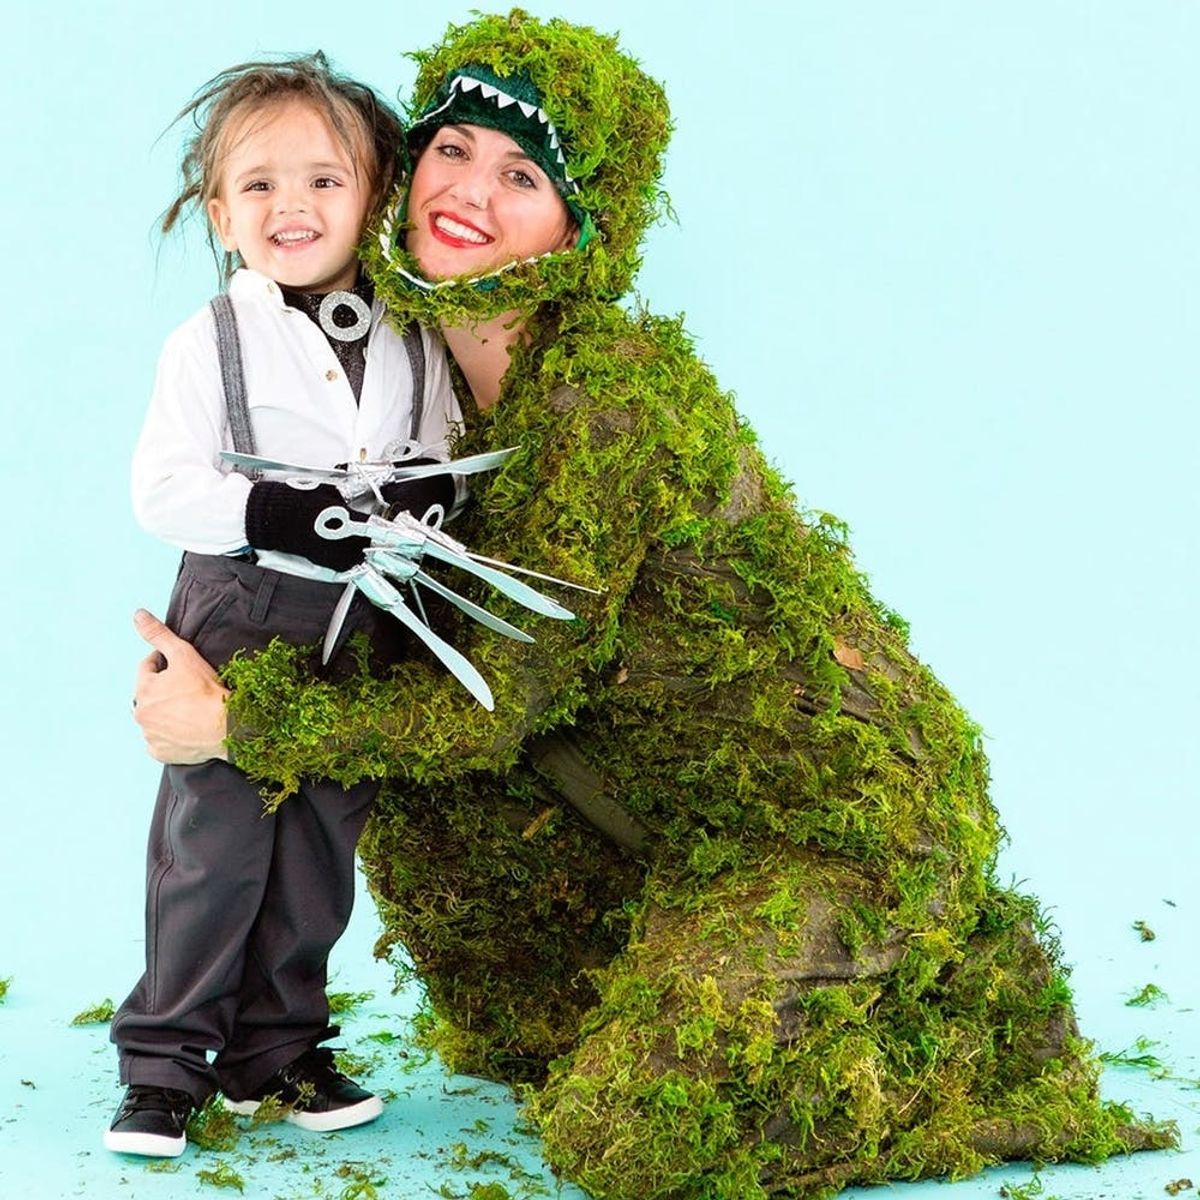 These Edward Scissorhands Costumes for Moms and Toddlers Are a Cut Above